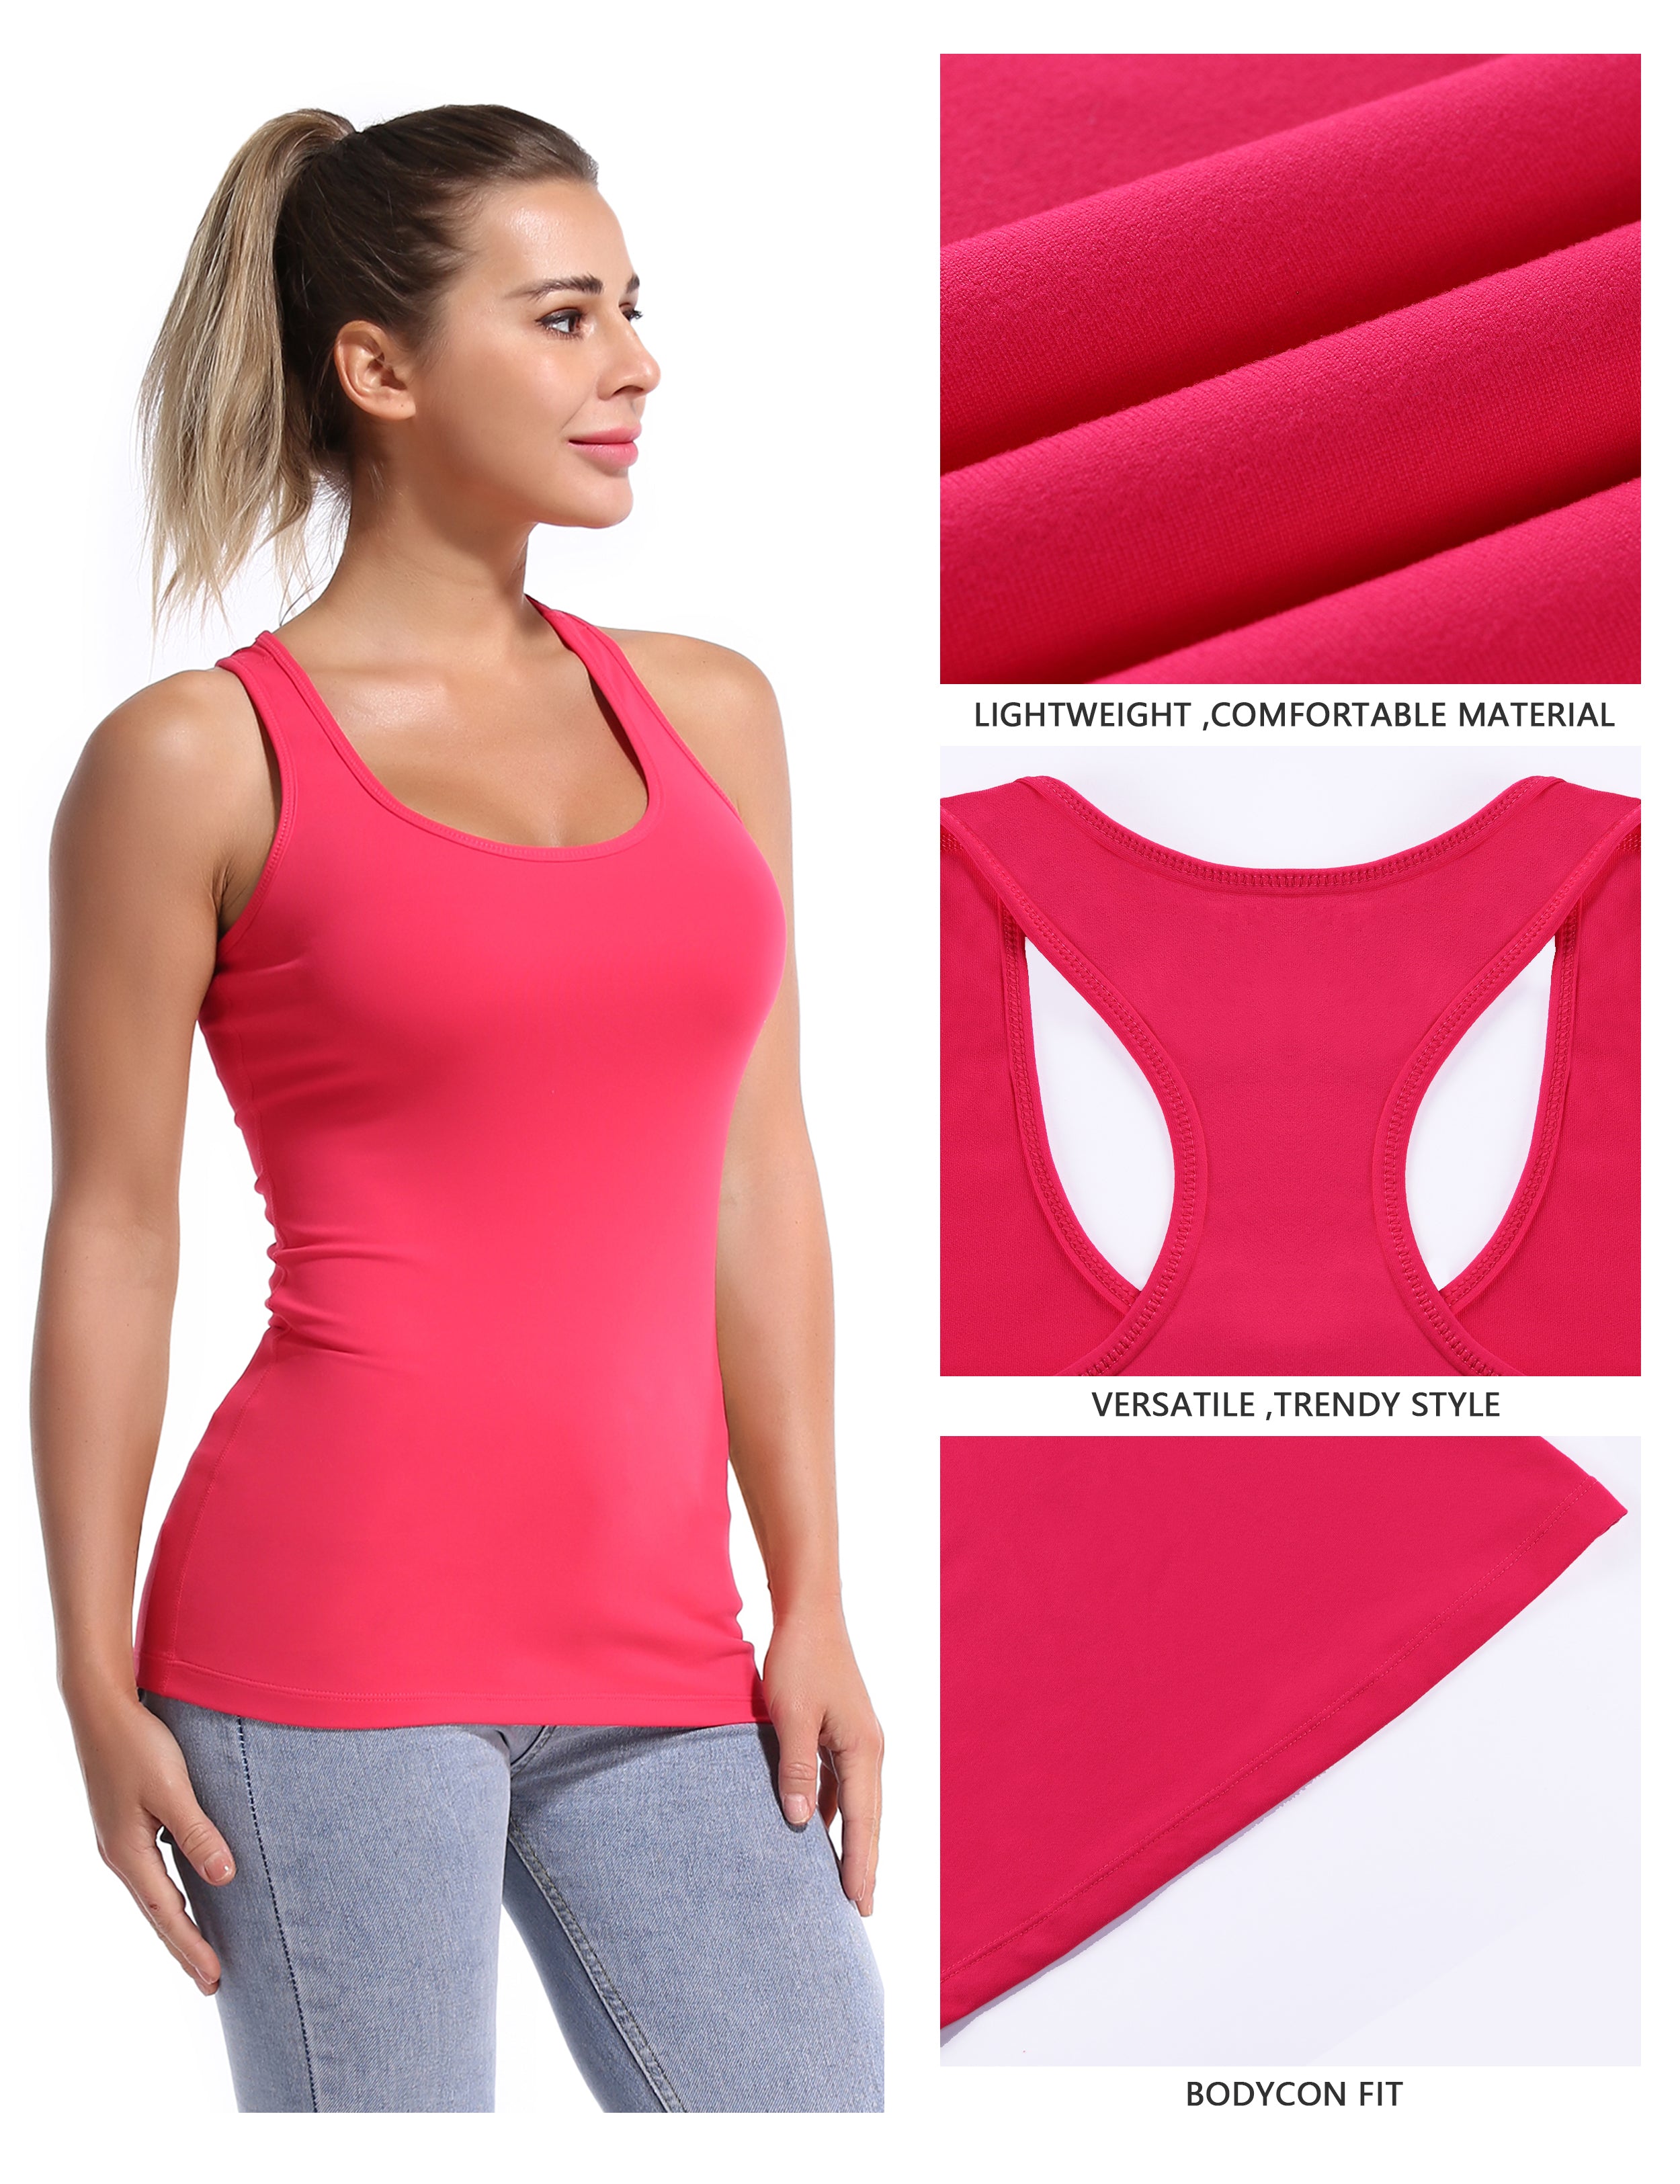 Racerback Athletic Tank Tops red 92%Nylon/8%Spandex(Cotton Soft) Designed for Yoga Tight Fit So buttery soft, it feels weightless Sweat-wicking Four-way stretch Breathable Contours your body Sits below the waistband for moderate, everyday coverage